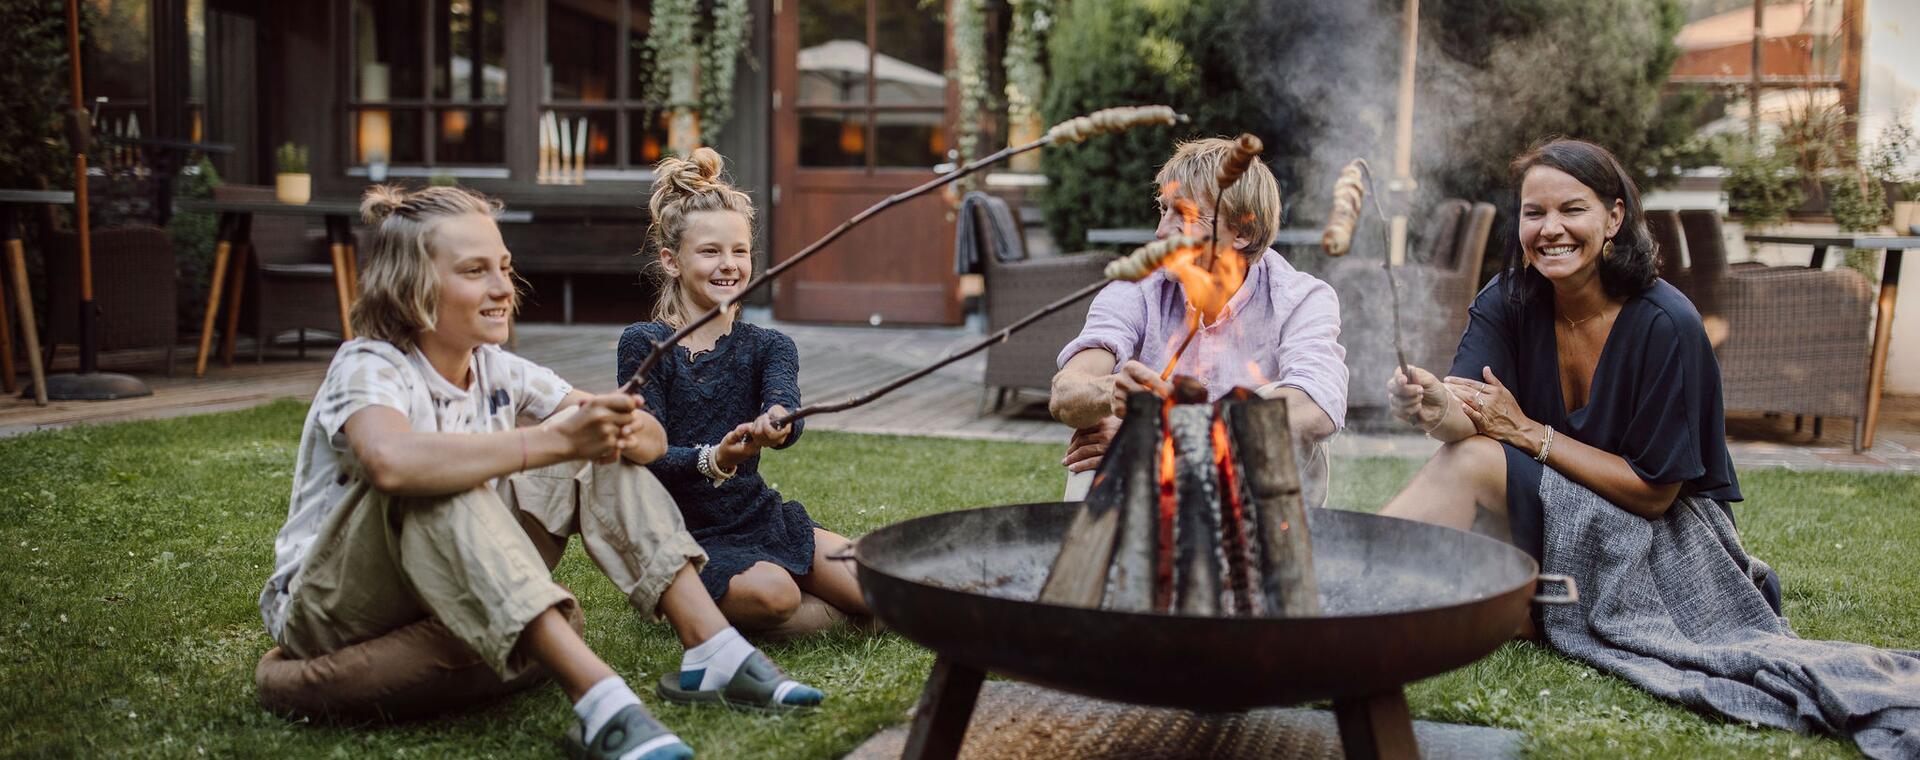 Family barbecue at the campfire at Gartenhotel Theresia